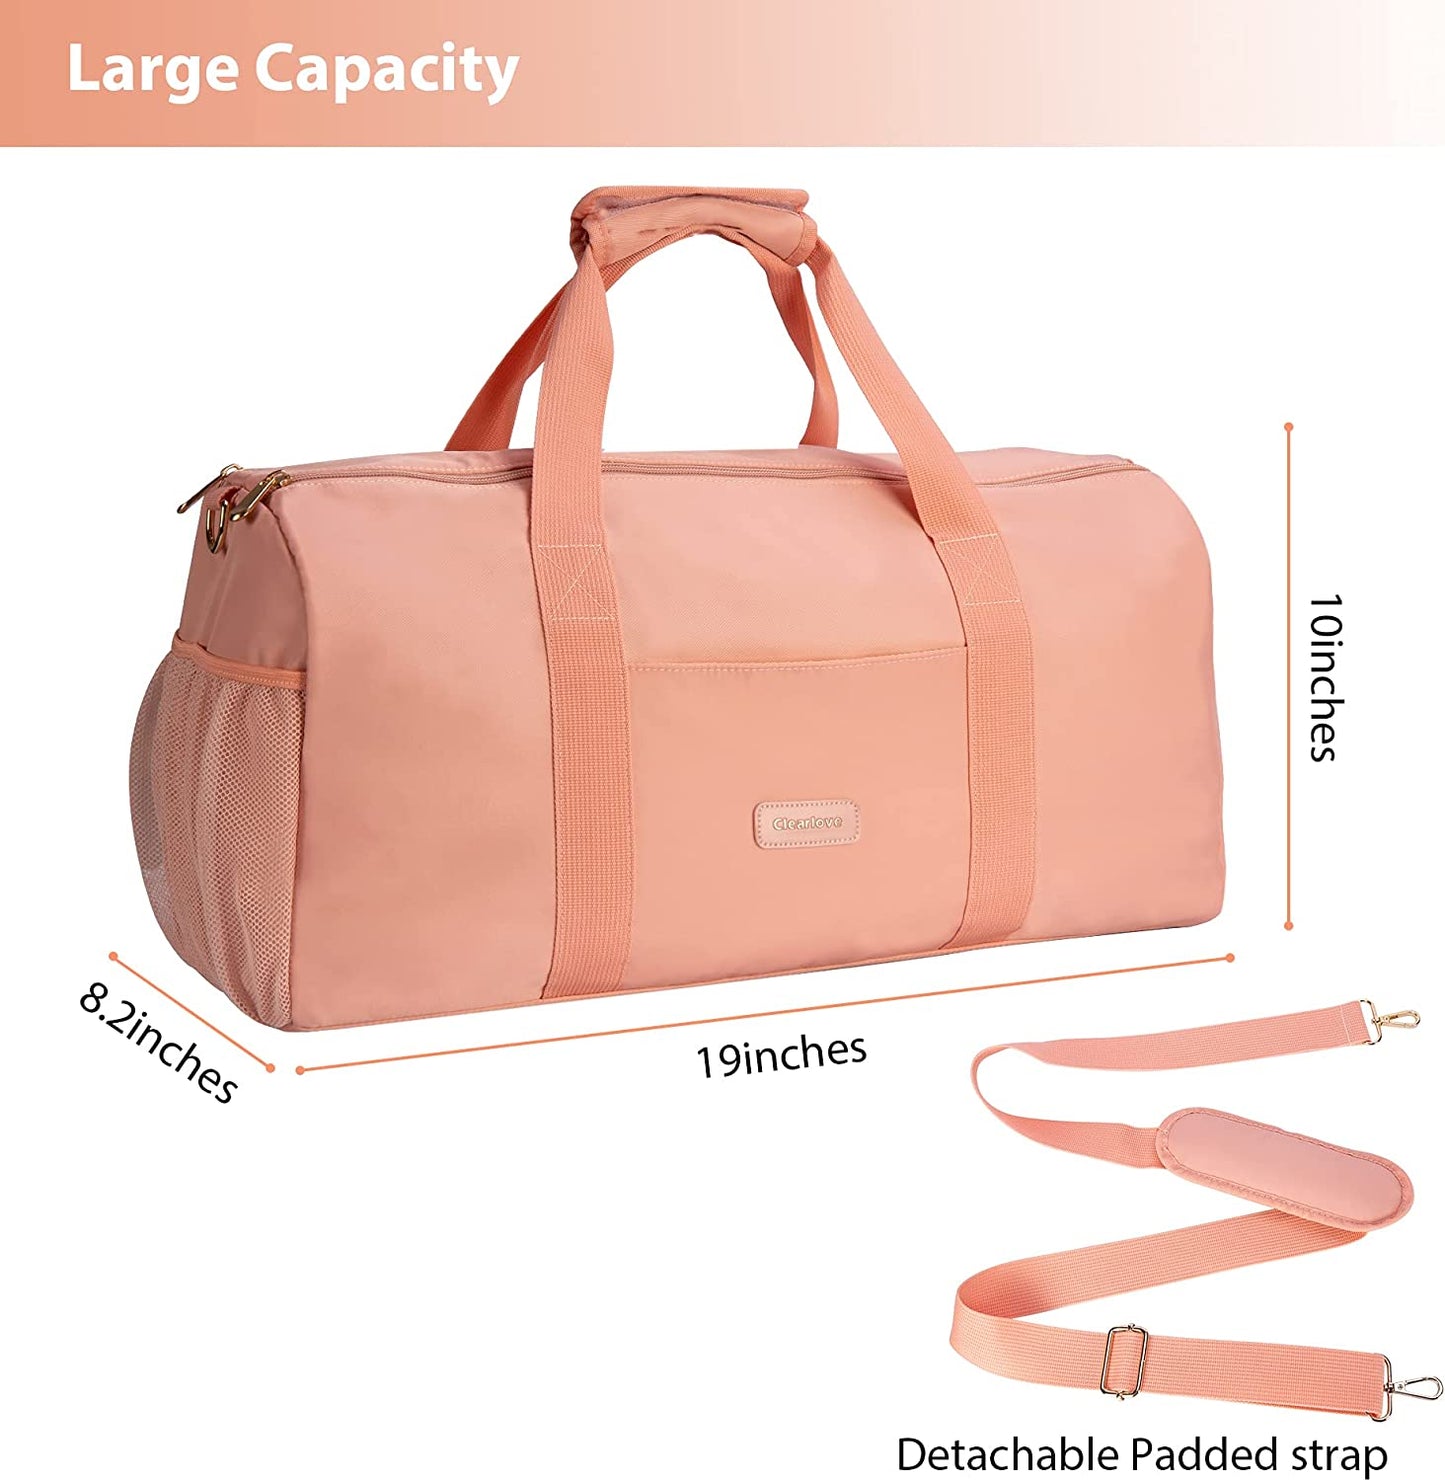 Sports Gym Bag for Men Women,Travel Duffel Bags,Shoe Bag Dry Bag Weekender Bag Waterproof for Swimming Fitness Gym Birthday Gifts For Women (Pink)